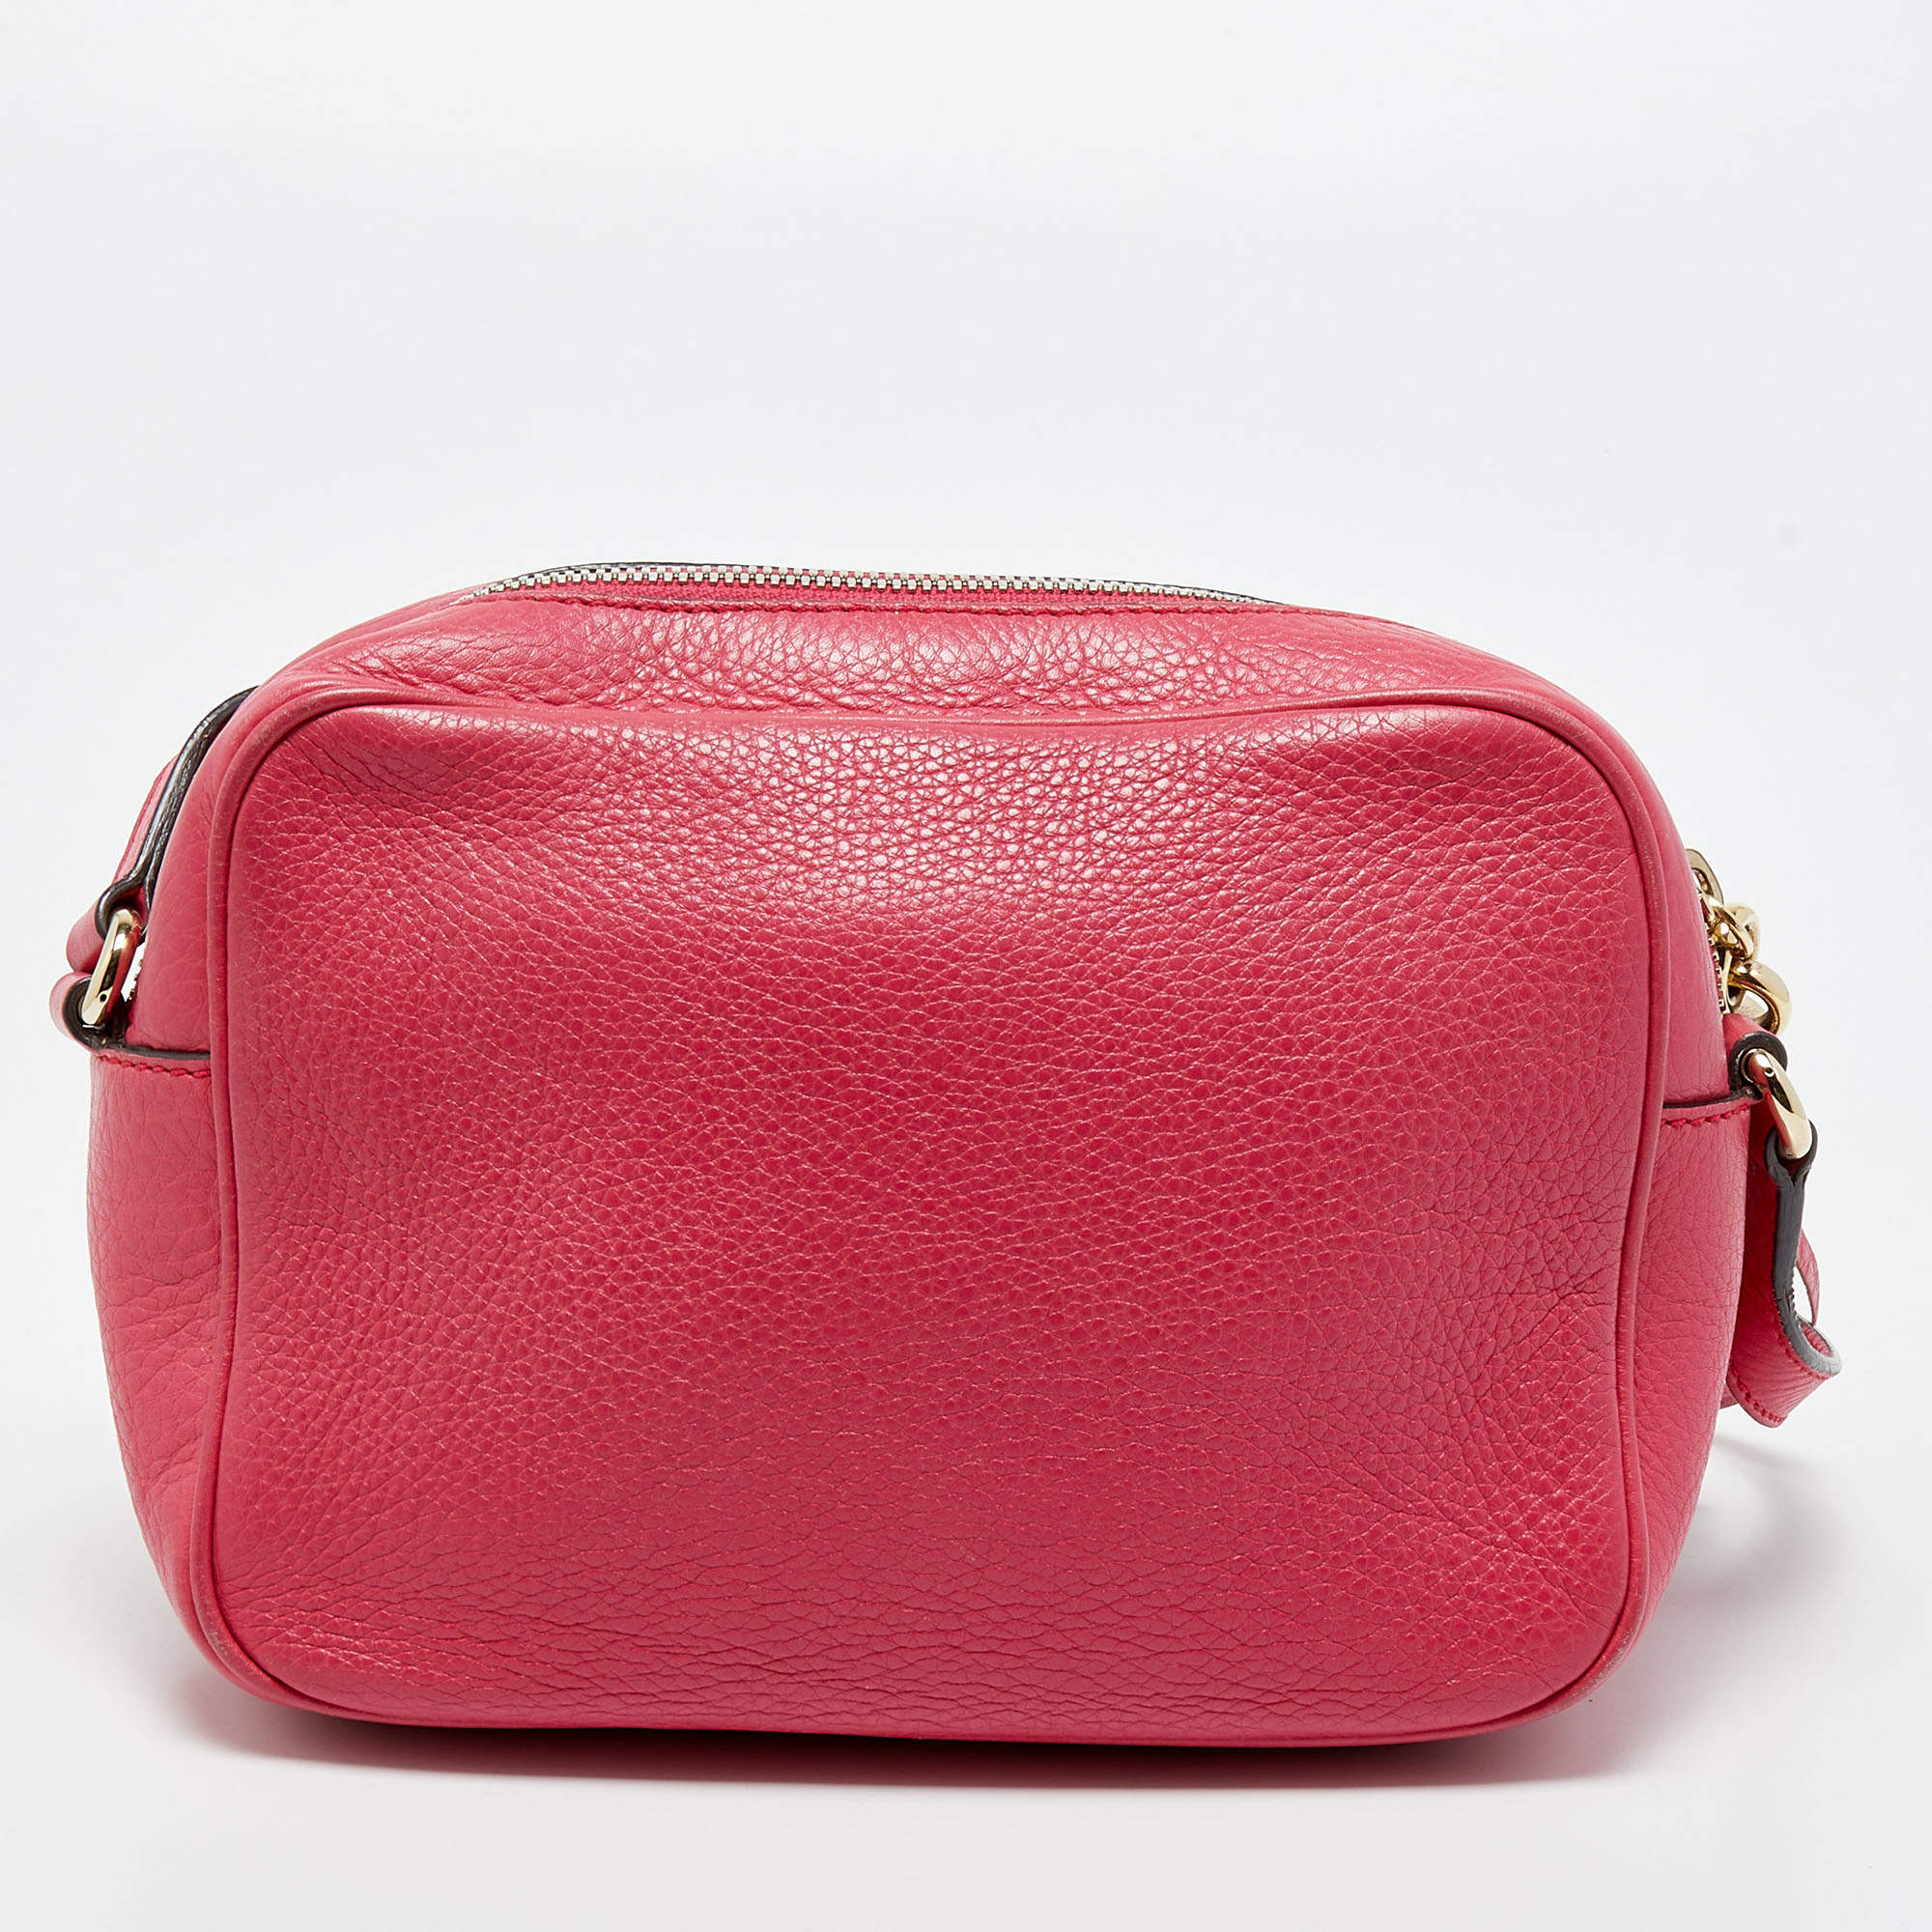 Buy Authentic Gucci Soho Tote / Shoulder Bag in Fuchsia Online in India 